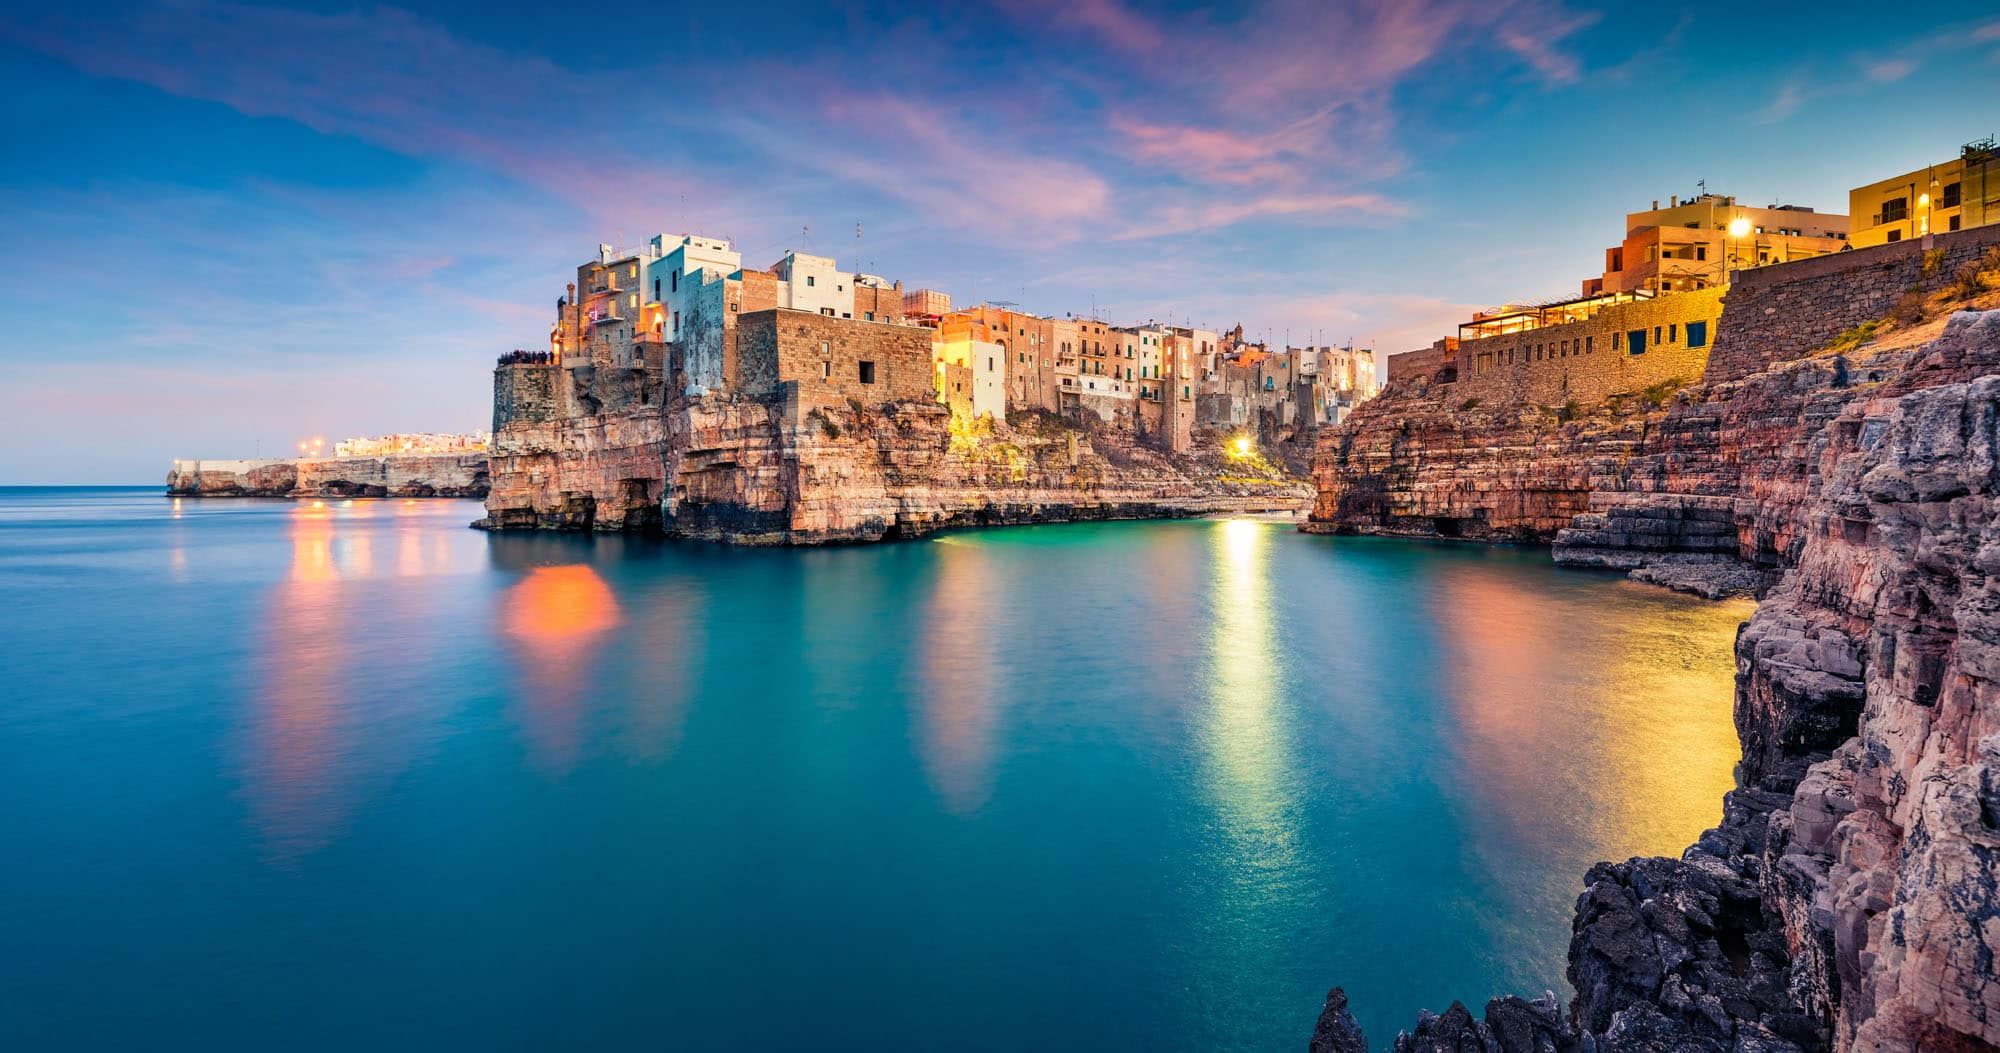 Featured image for “15 Beautiful Places to Visit in Puglia, Italy”